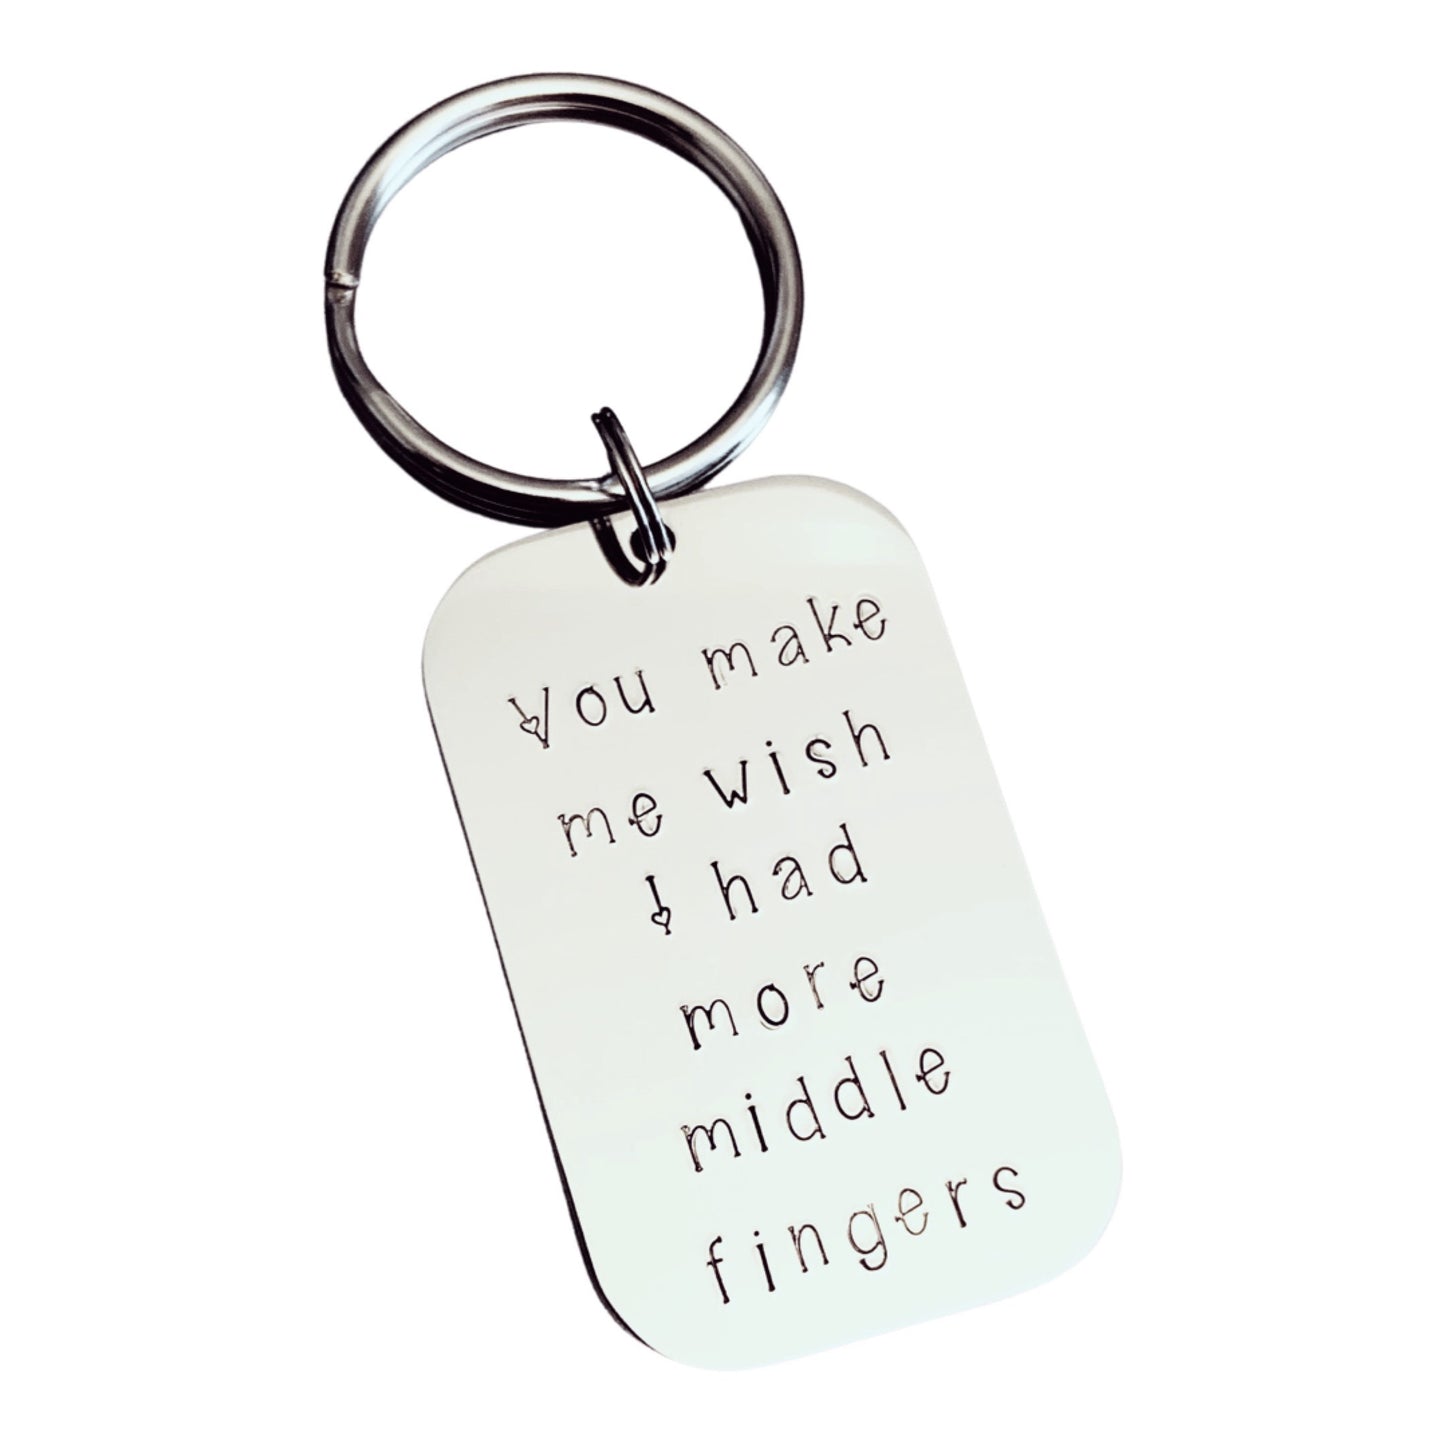 You make me wish I had more middle fingers | Key Chain